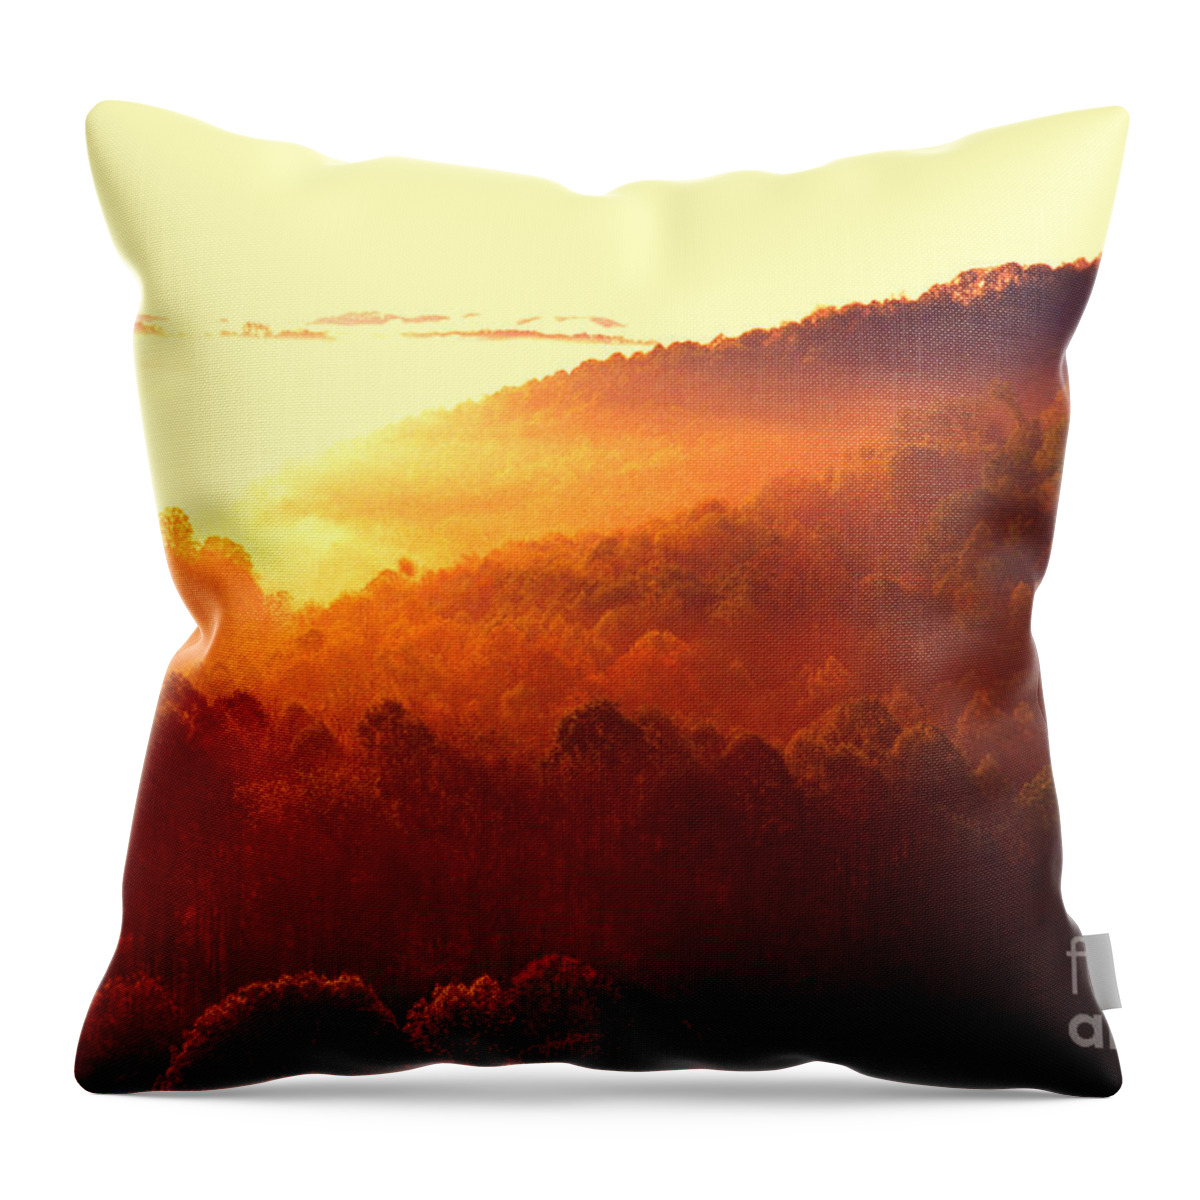 West Virginia Throw Pillow featuring the photograph Majestic Mountain Sunrise by Thomas R Fletcher